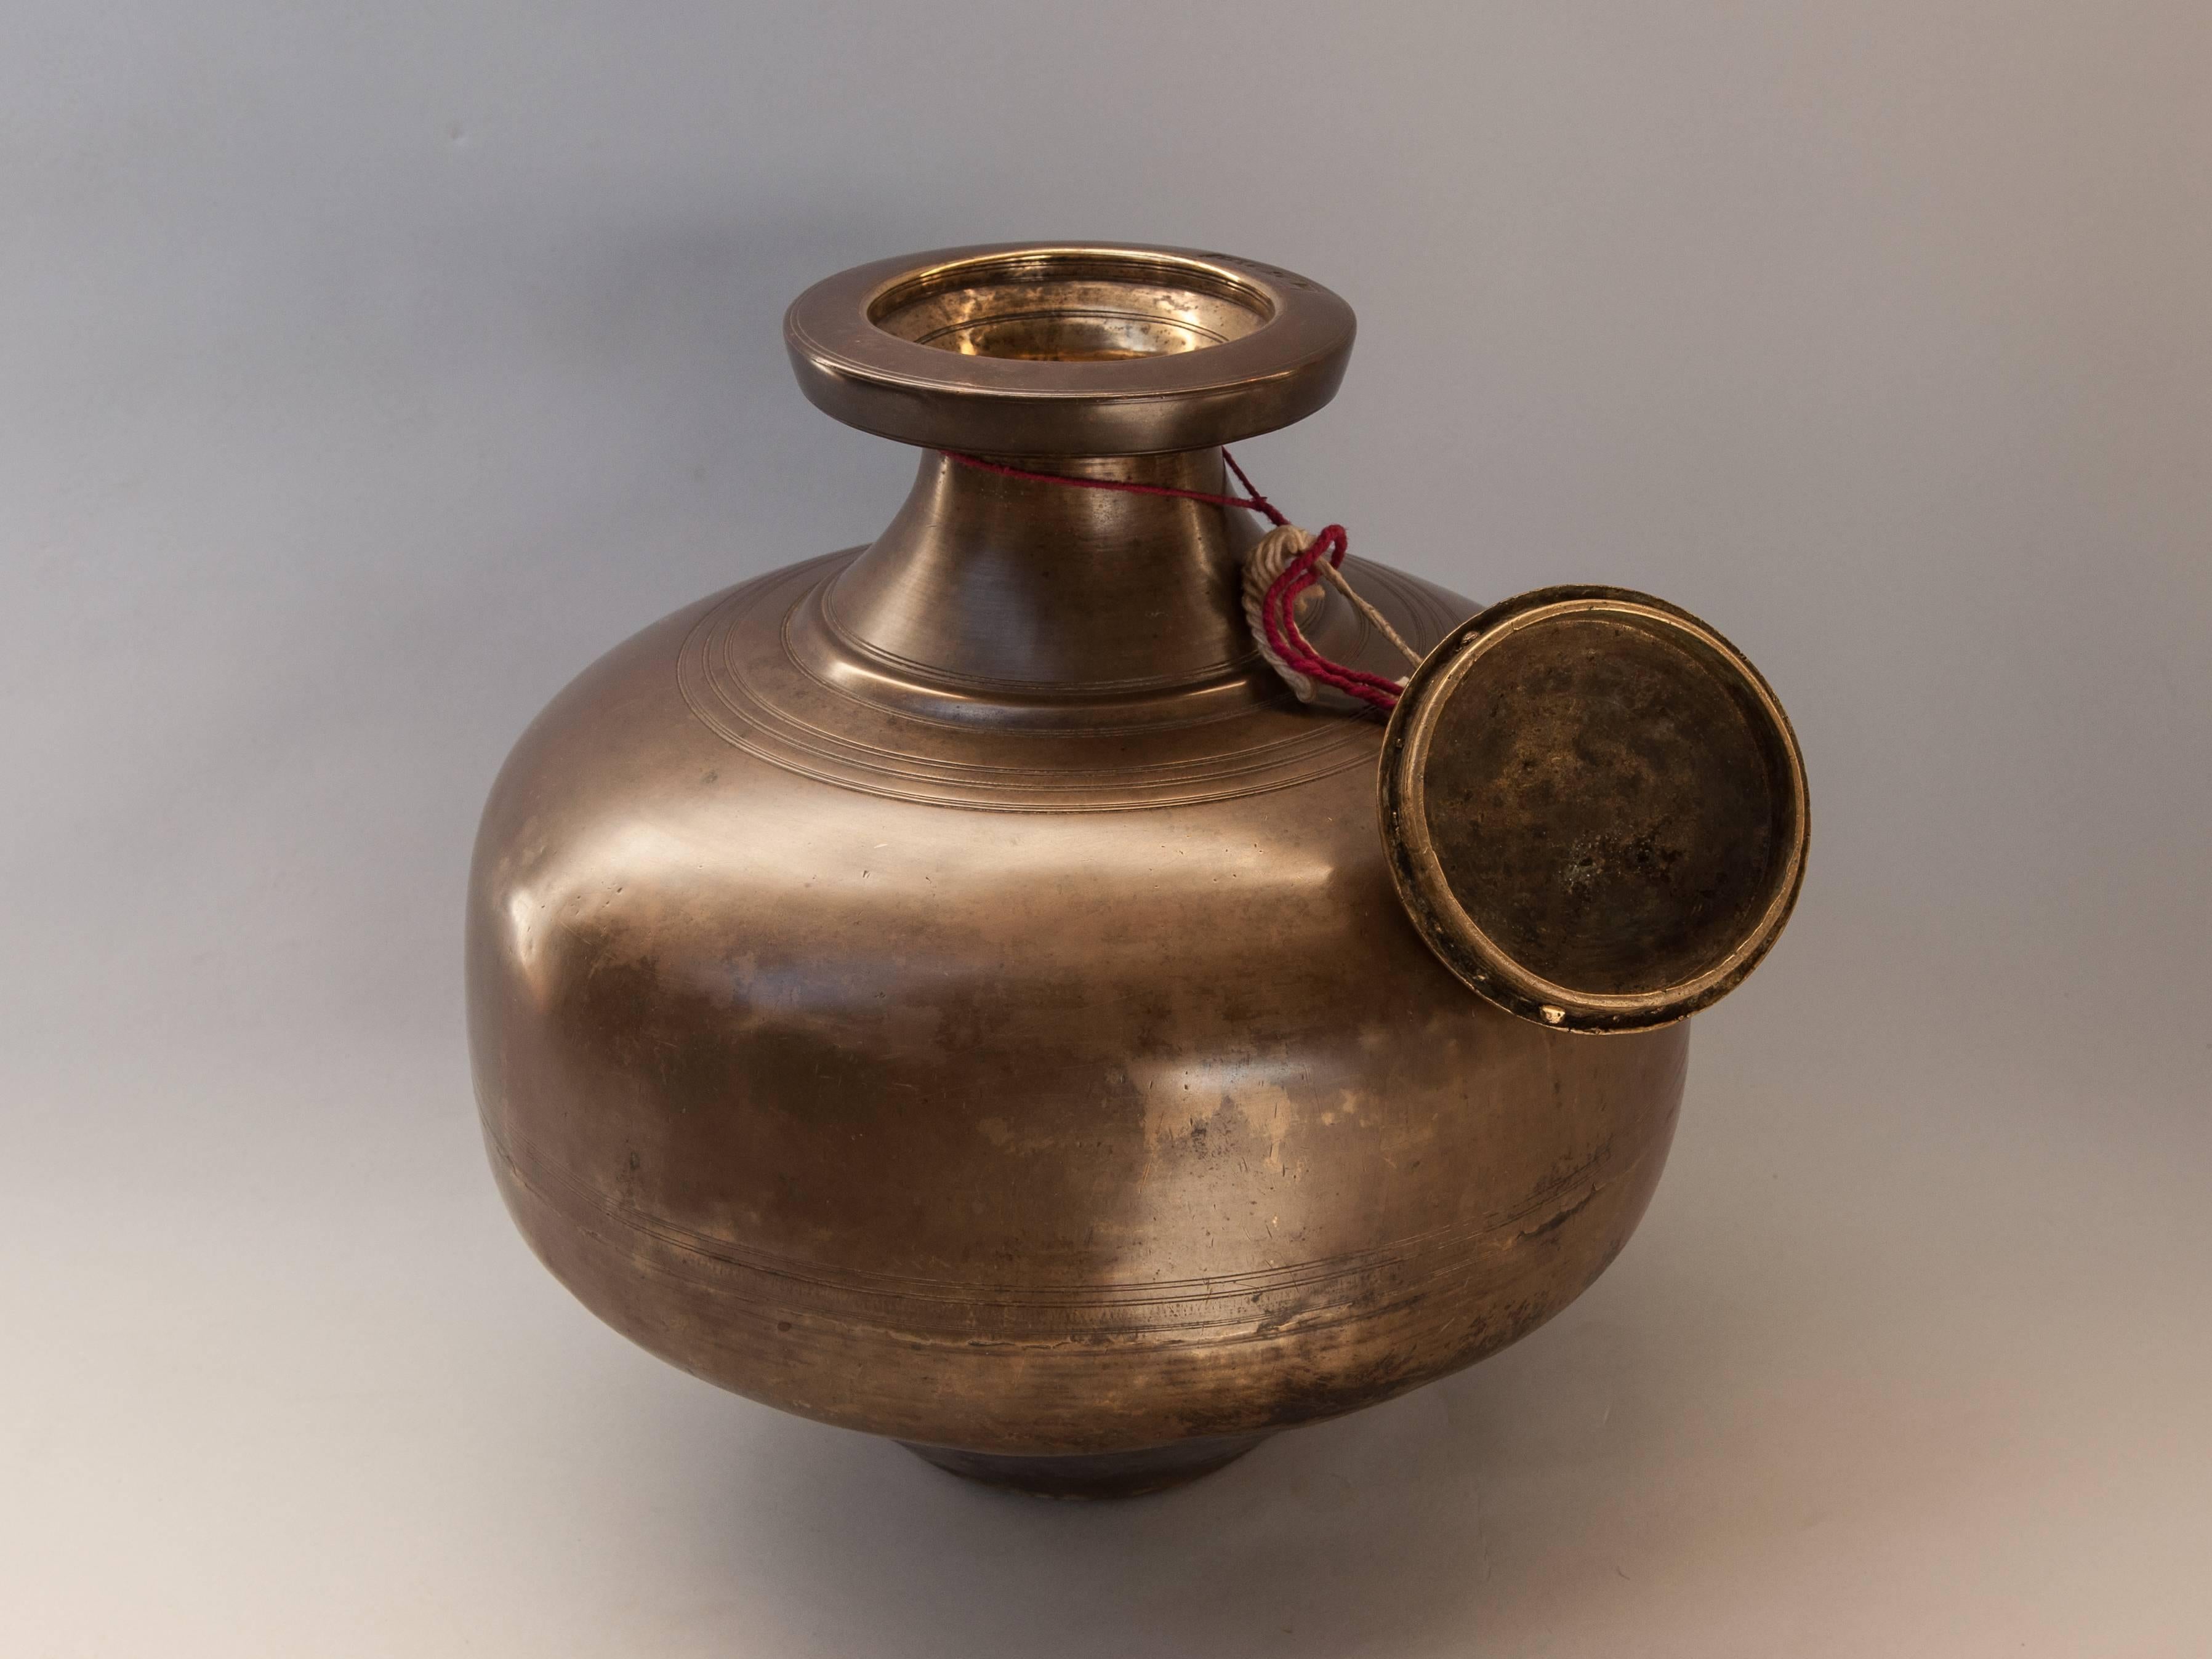 Bengali Brass Water Pot with Cap. Early-Mid 20th Century. Bengal, India.
Offered by Bruce Hughes.
This beautifully shaped and heavy brass or bronze vessel was used to store water, to keep it cool and ritually pure. 
Dimensions: 13.5 inches diameter